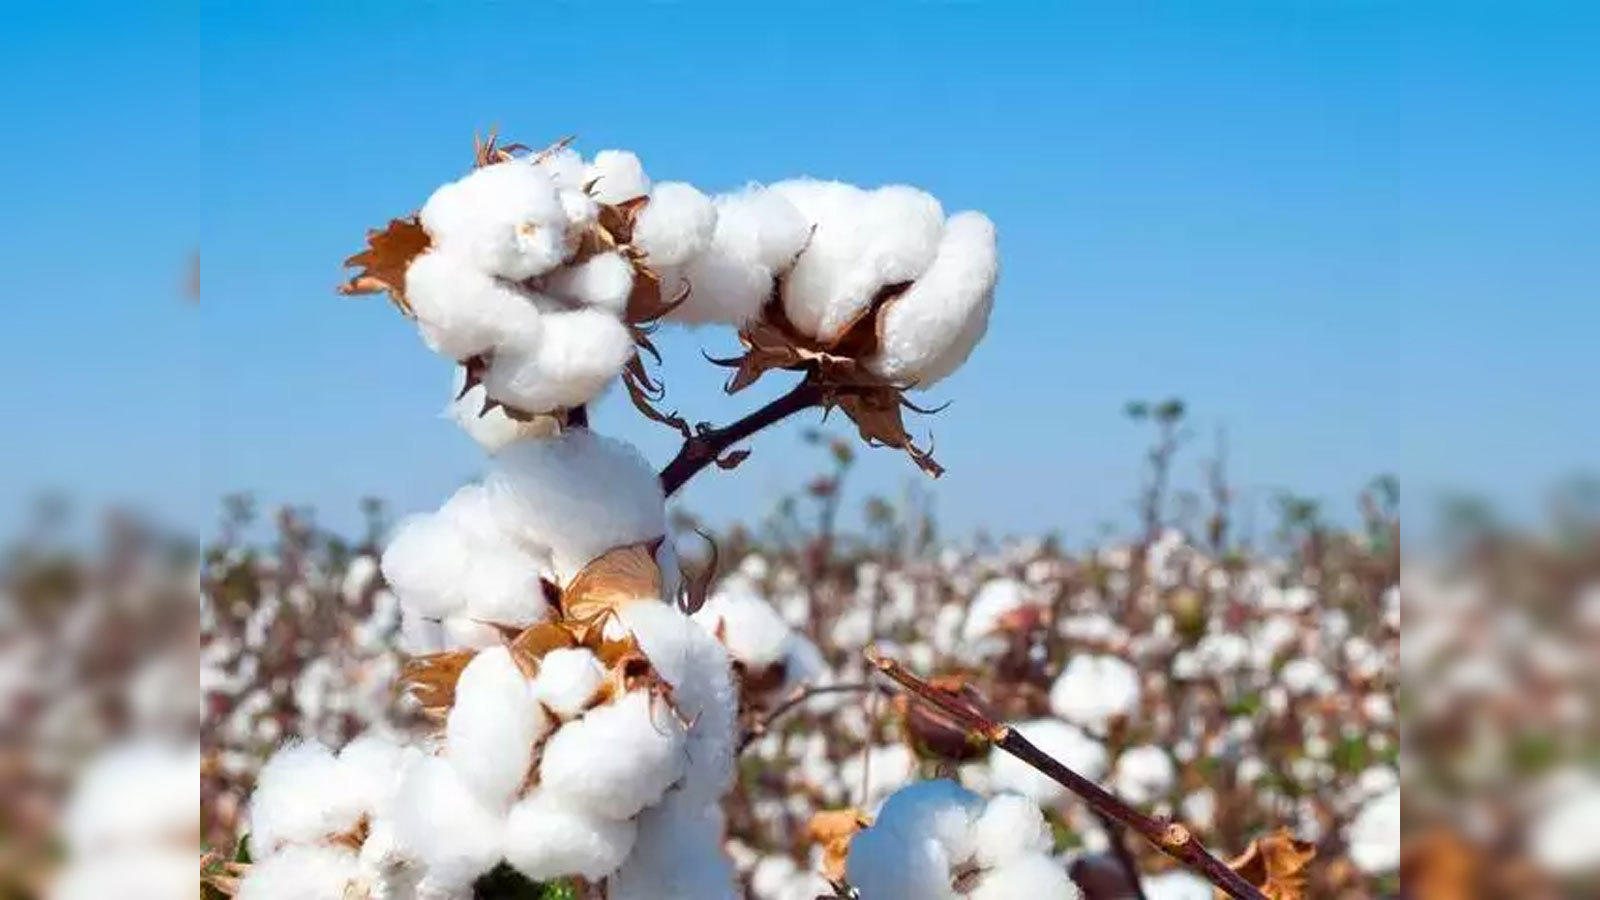 https://img.etimg.com/thumb/width-1600,height-900,imgsize-124641,resizemode-75,msid-73936226/news/economy/agriculture/cai-maintains-its-cotton-crop-estimate-for-2019-20-crop-year-at-354-50-lakh-bales.jpg